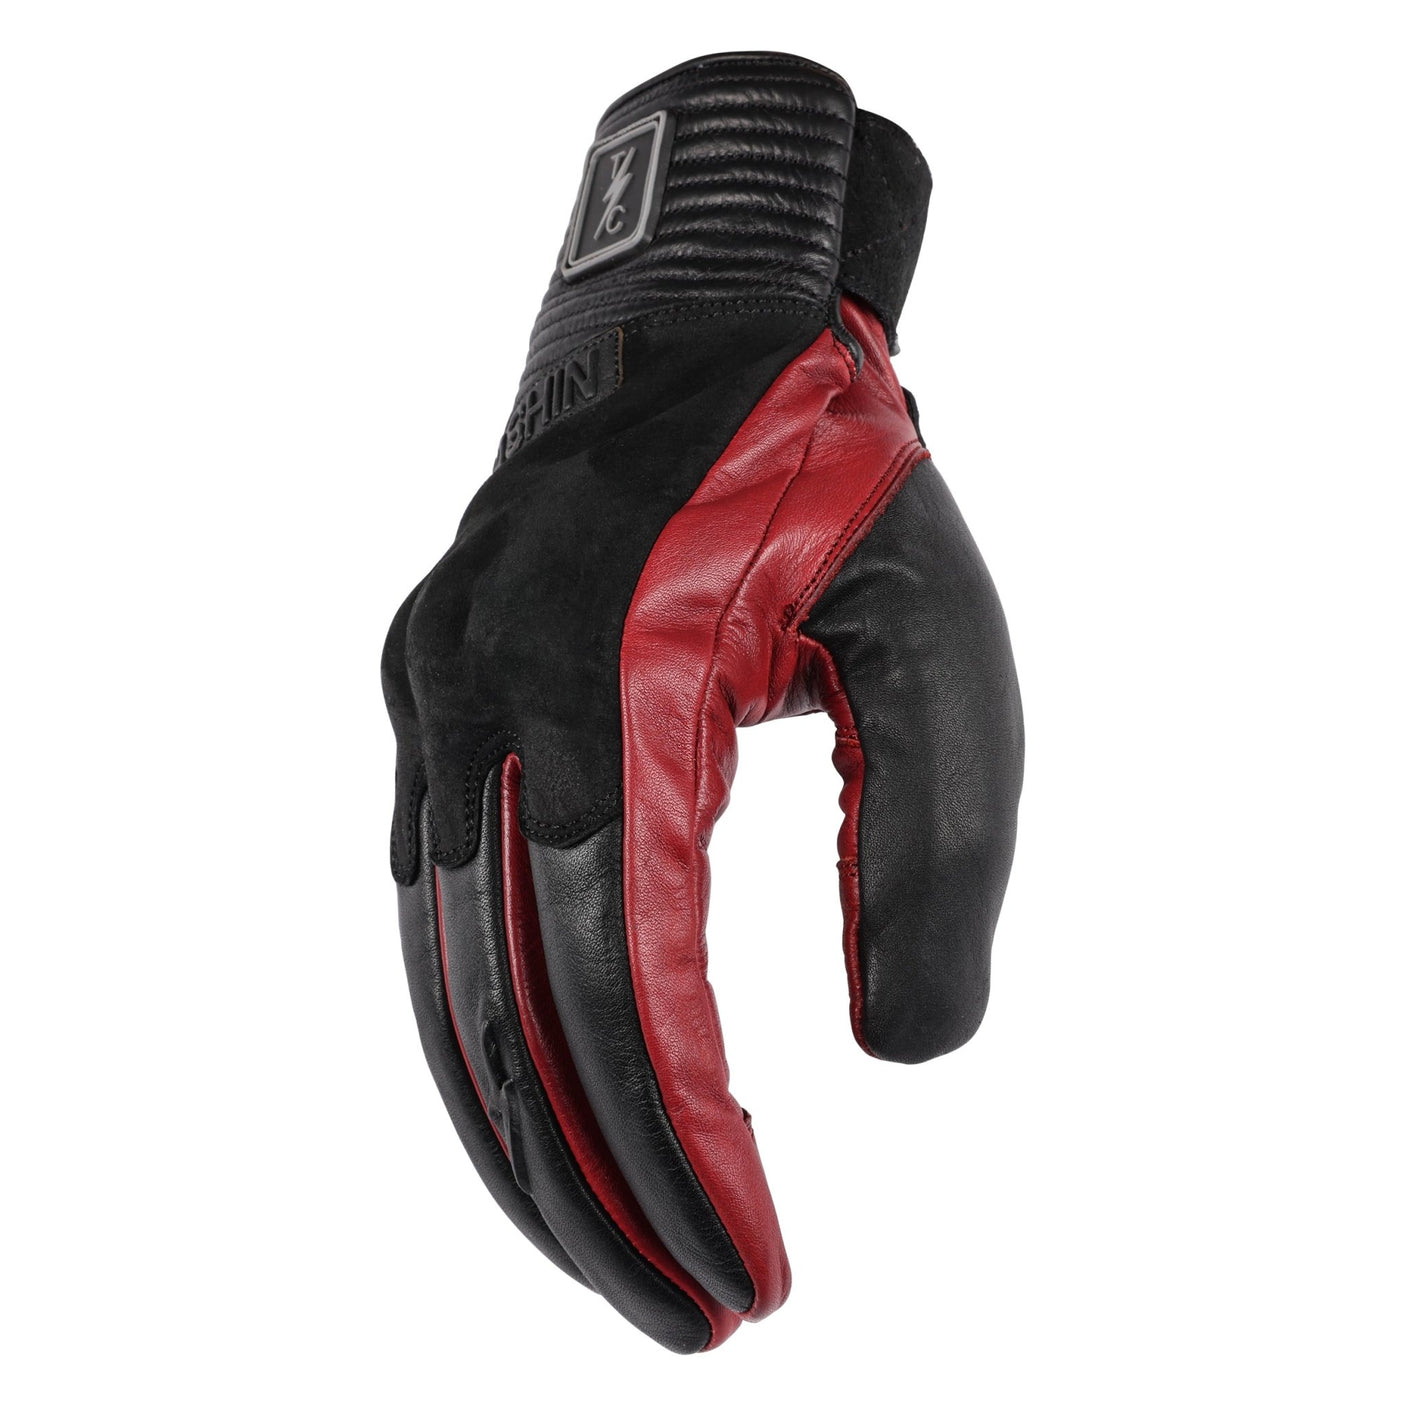 Boxer Glove - Red - Blood Eagle Speed Shop